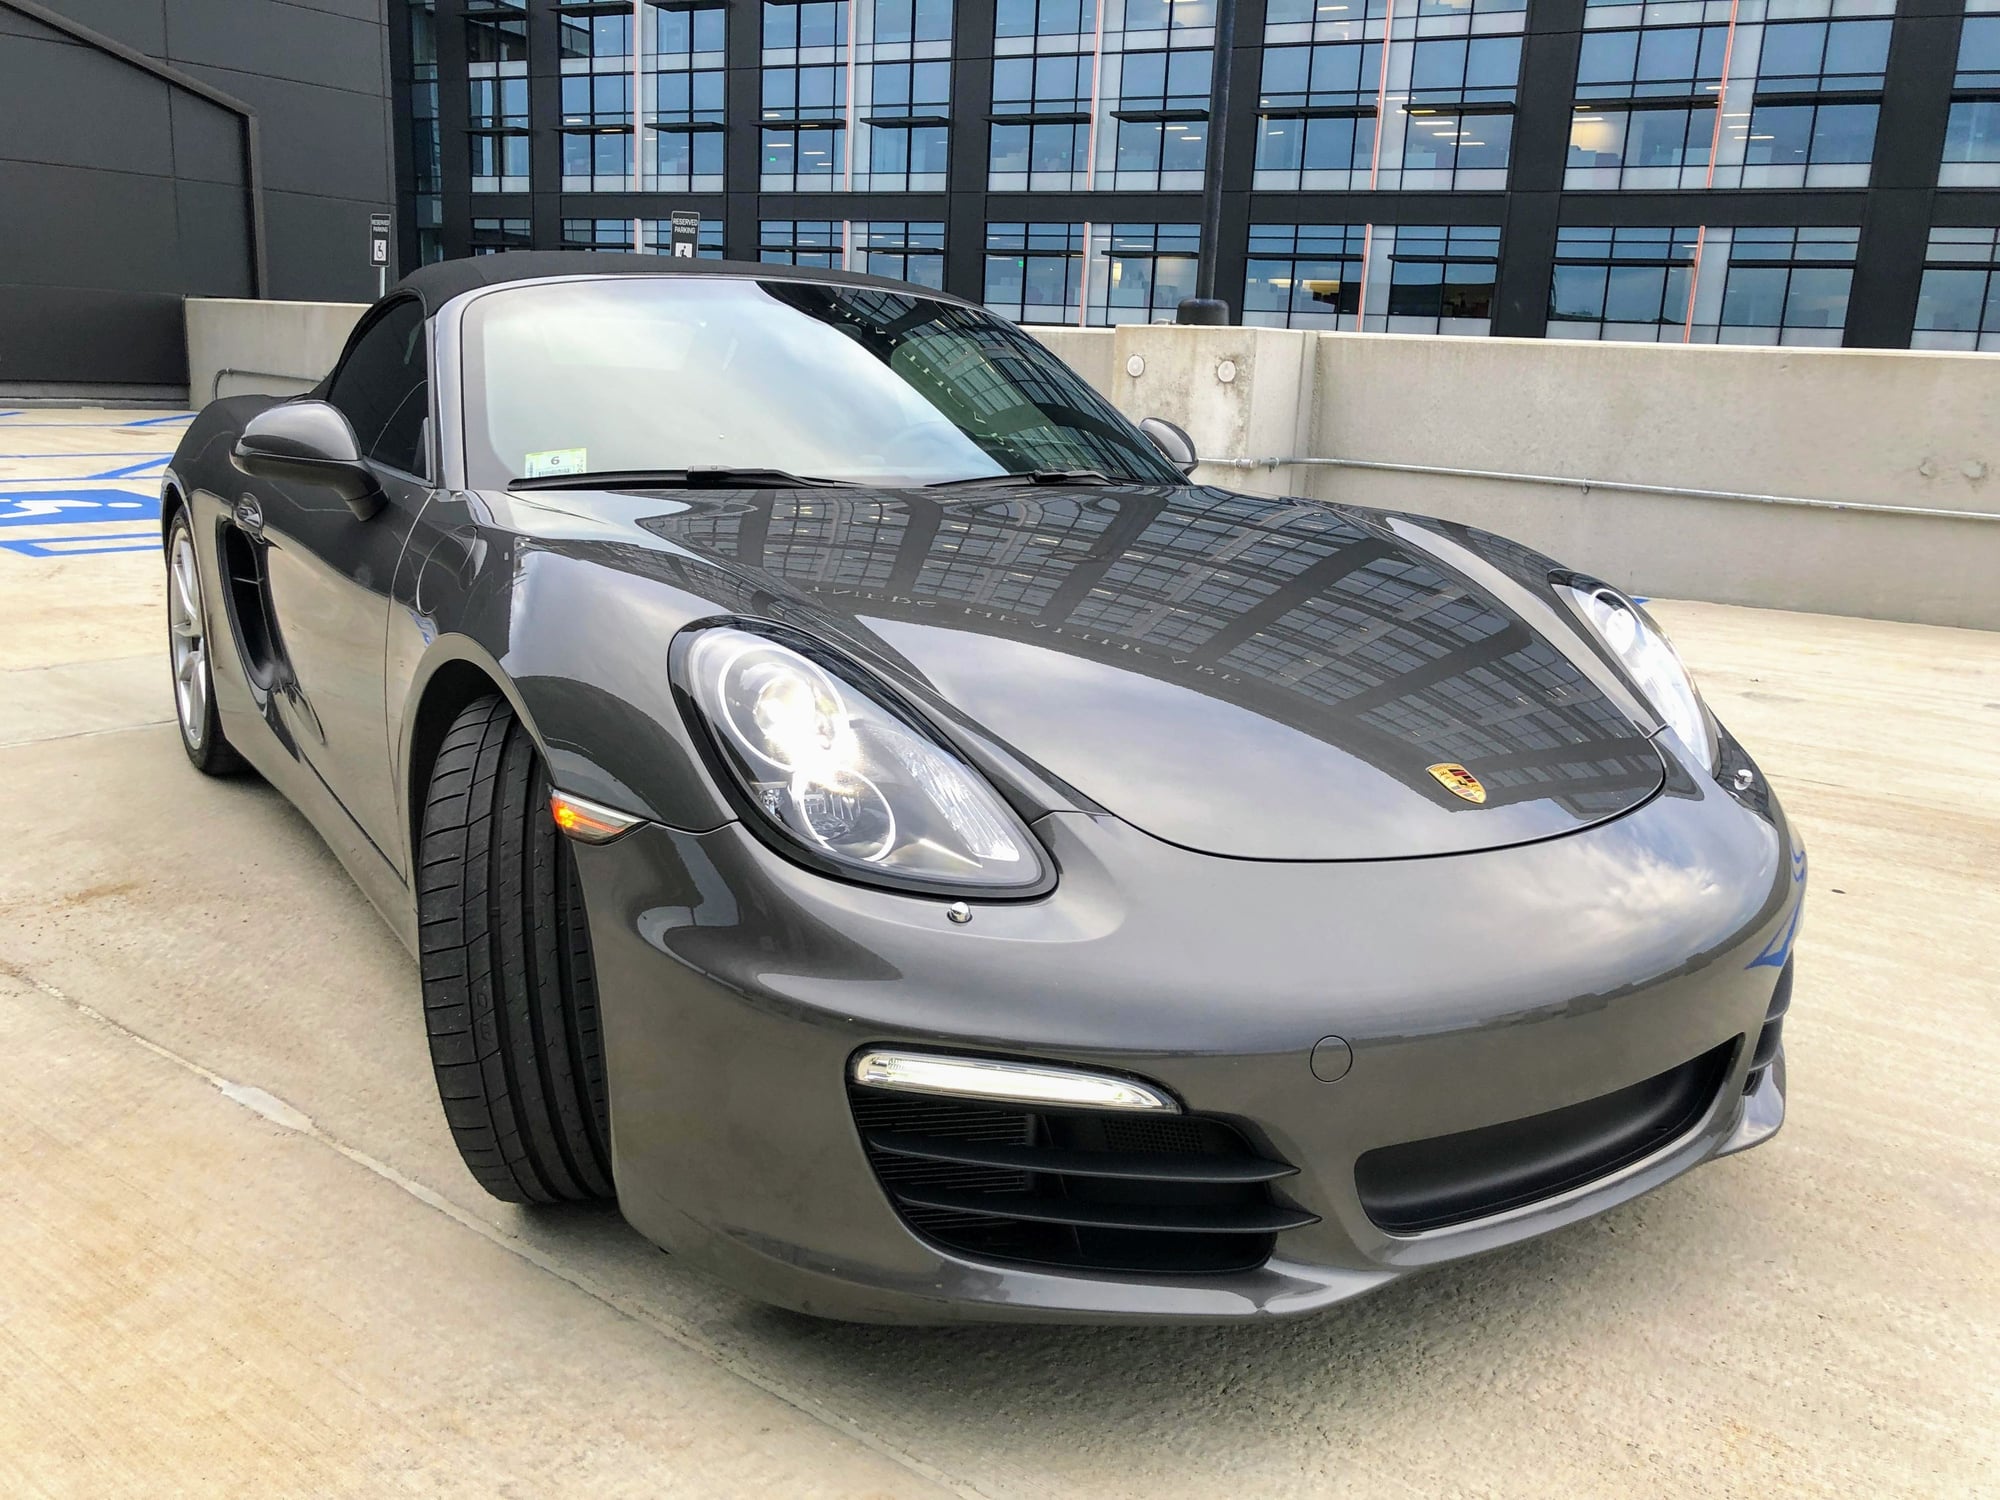 2013 Porsche Boxster - 2013 981 Boxster S with lots of options, Agate grey - Used - VIN WP0CB2A82DS130170 - 29,800 Miles - 6 cyl - 2WD - Automatic - Convertible - Gray - Sunnyvale, CA 94085, United States